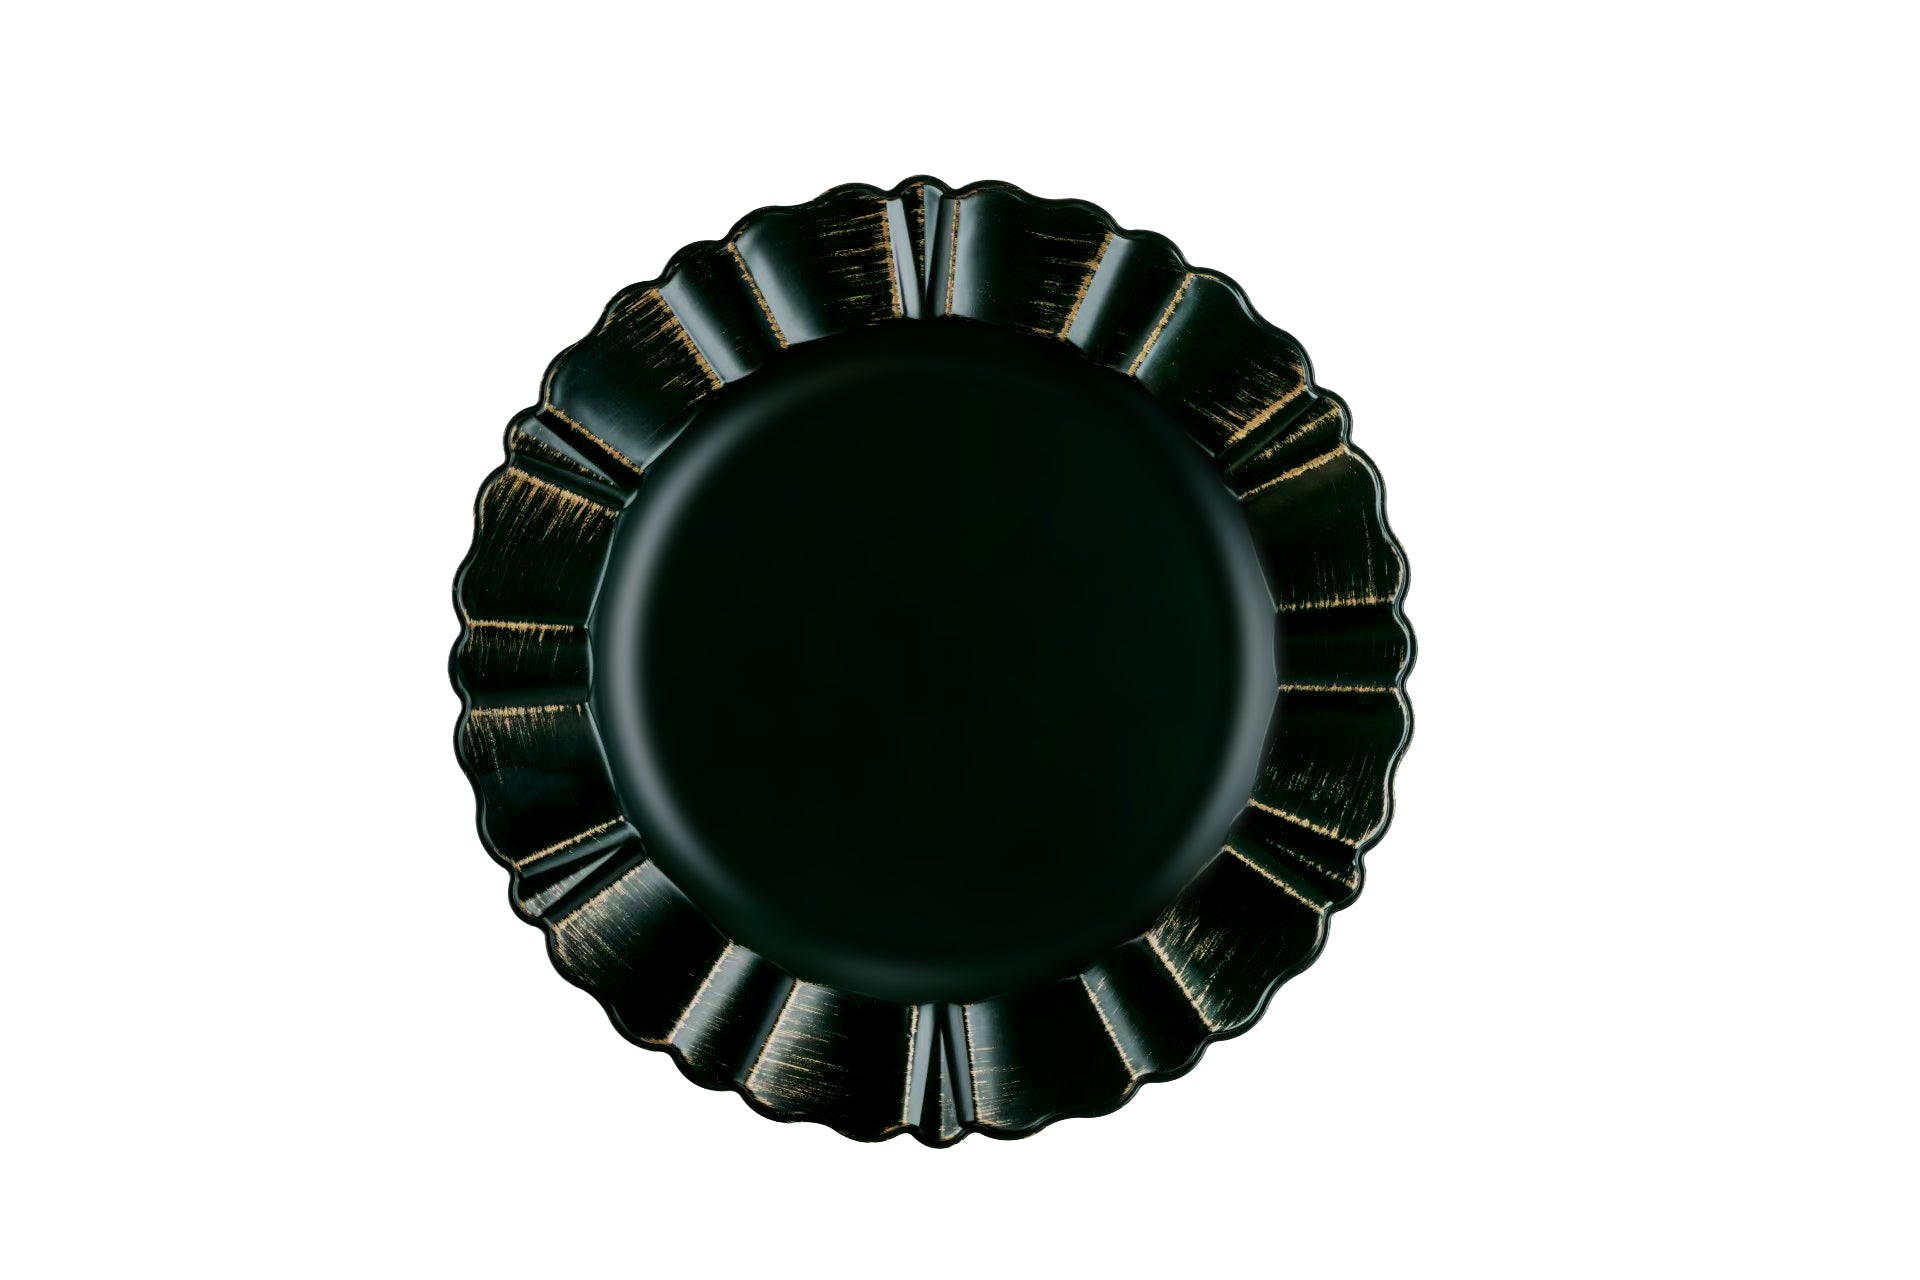 Waved Scalloped Acrylic 13" Charger Plate - Emerald Green & Gold